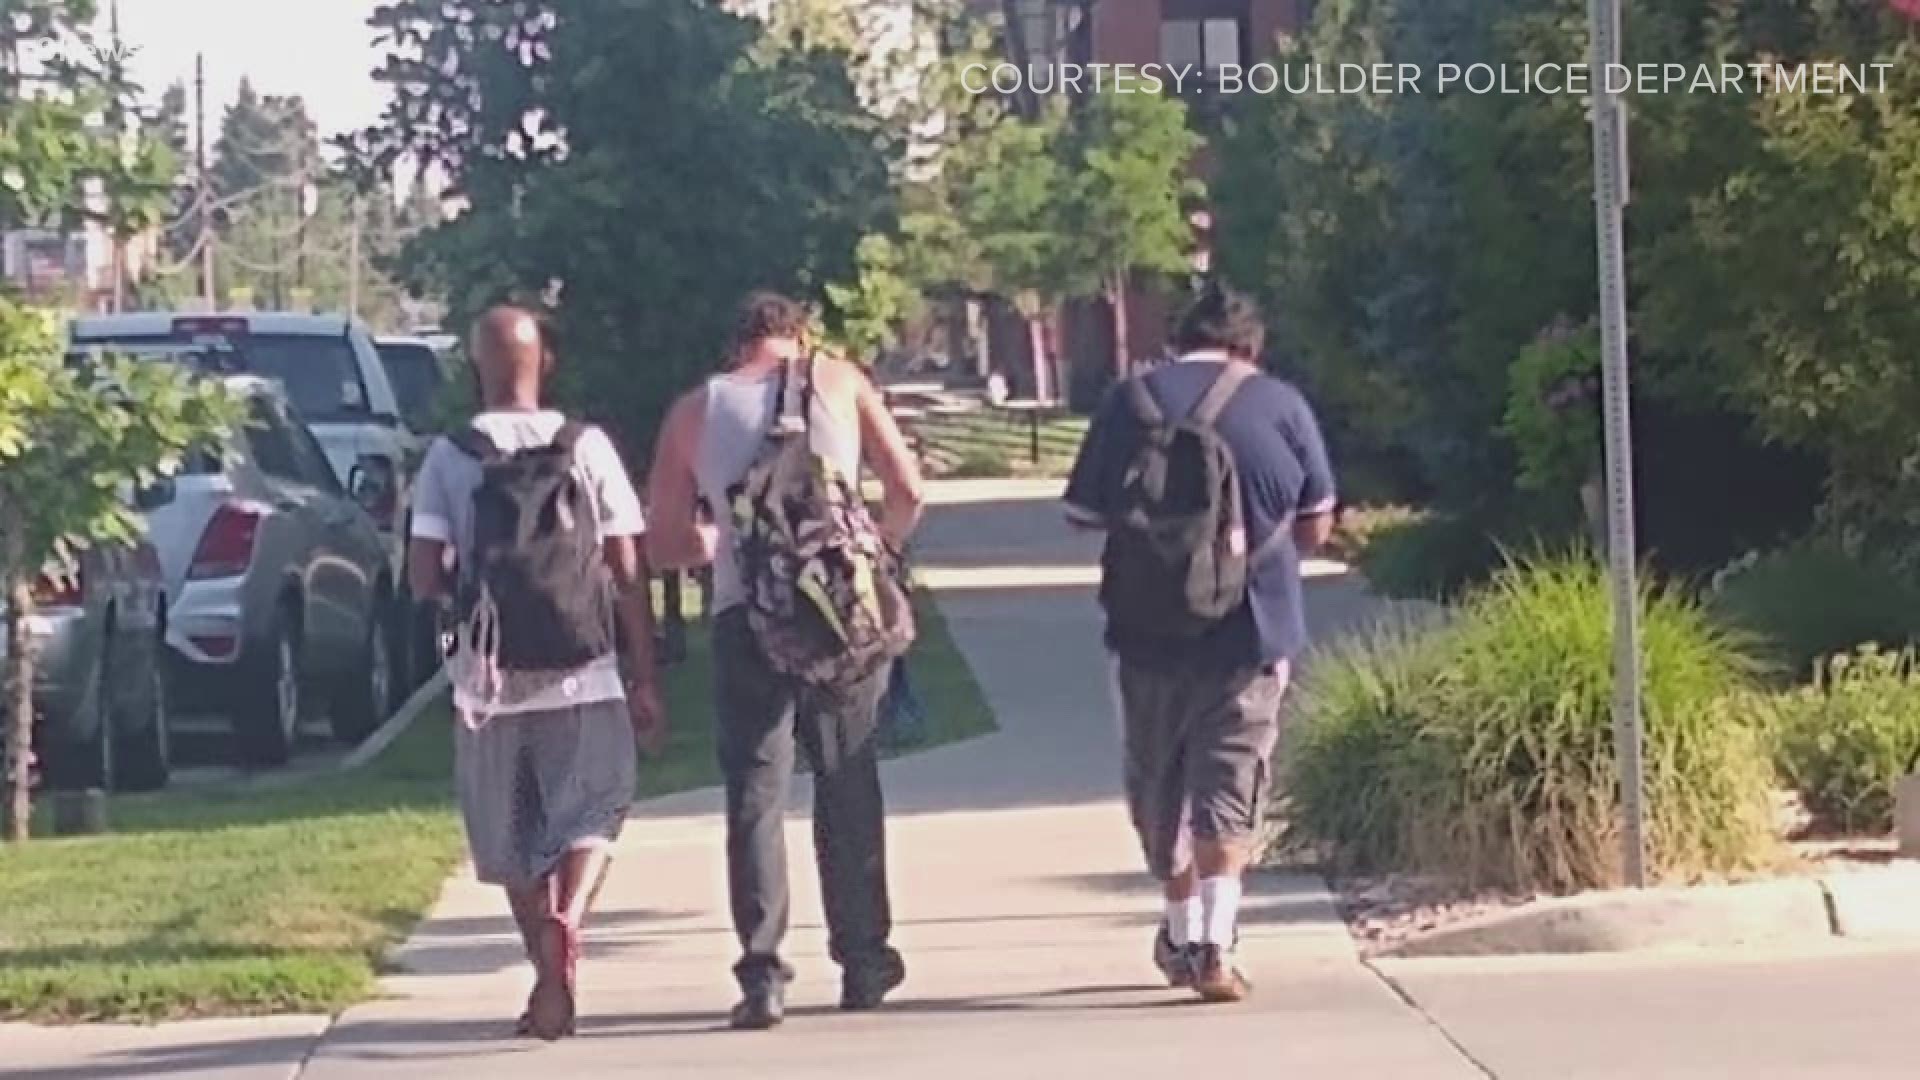 The victim snapped a photo of the three men, and police are asking for help identifying them.